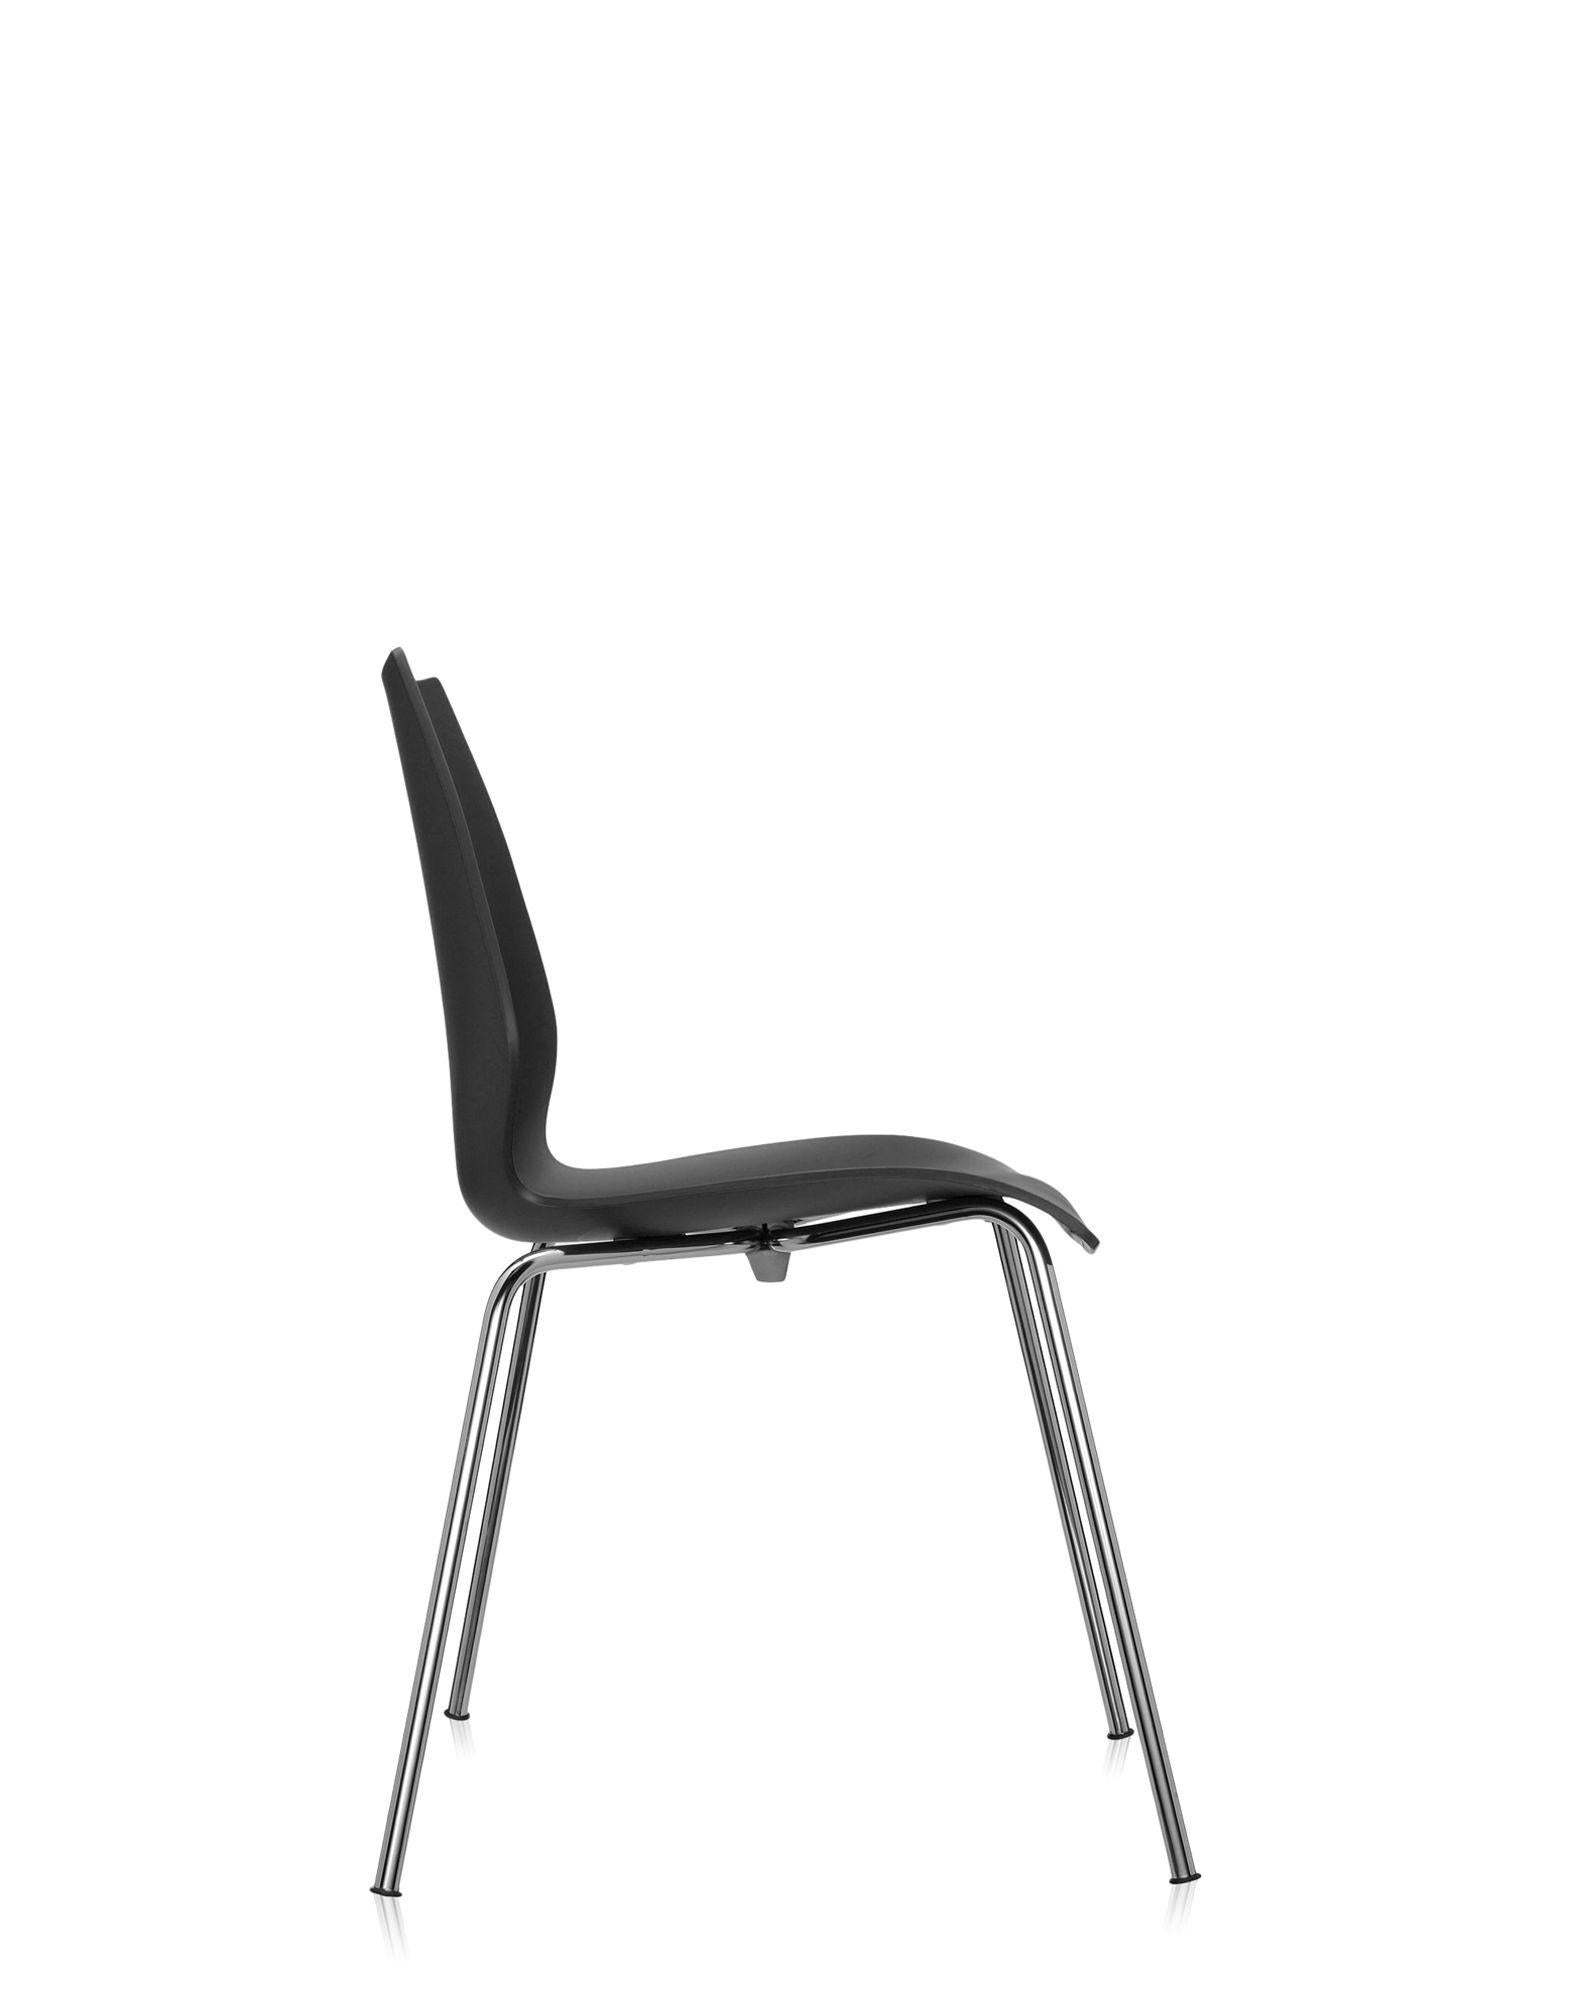 Contemporary Set of 2 Kartell Maui Armchair in Anthracite by Ludovica and Roberto Palomba